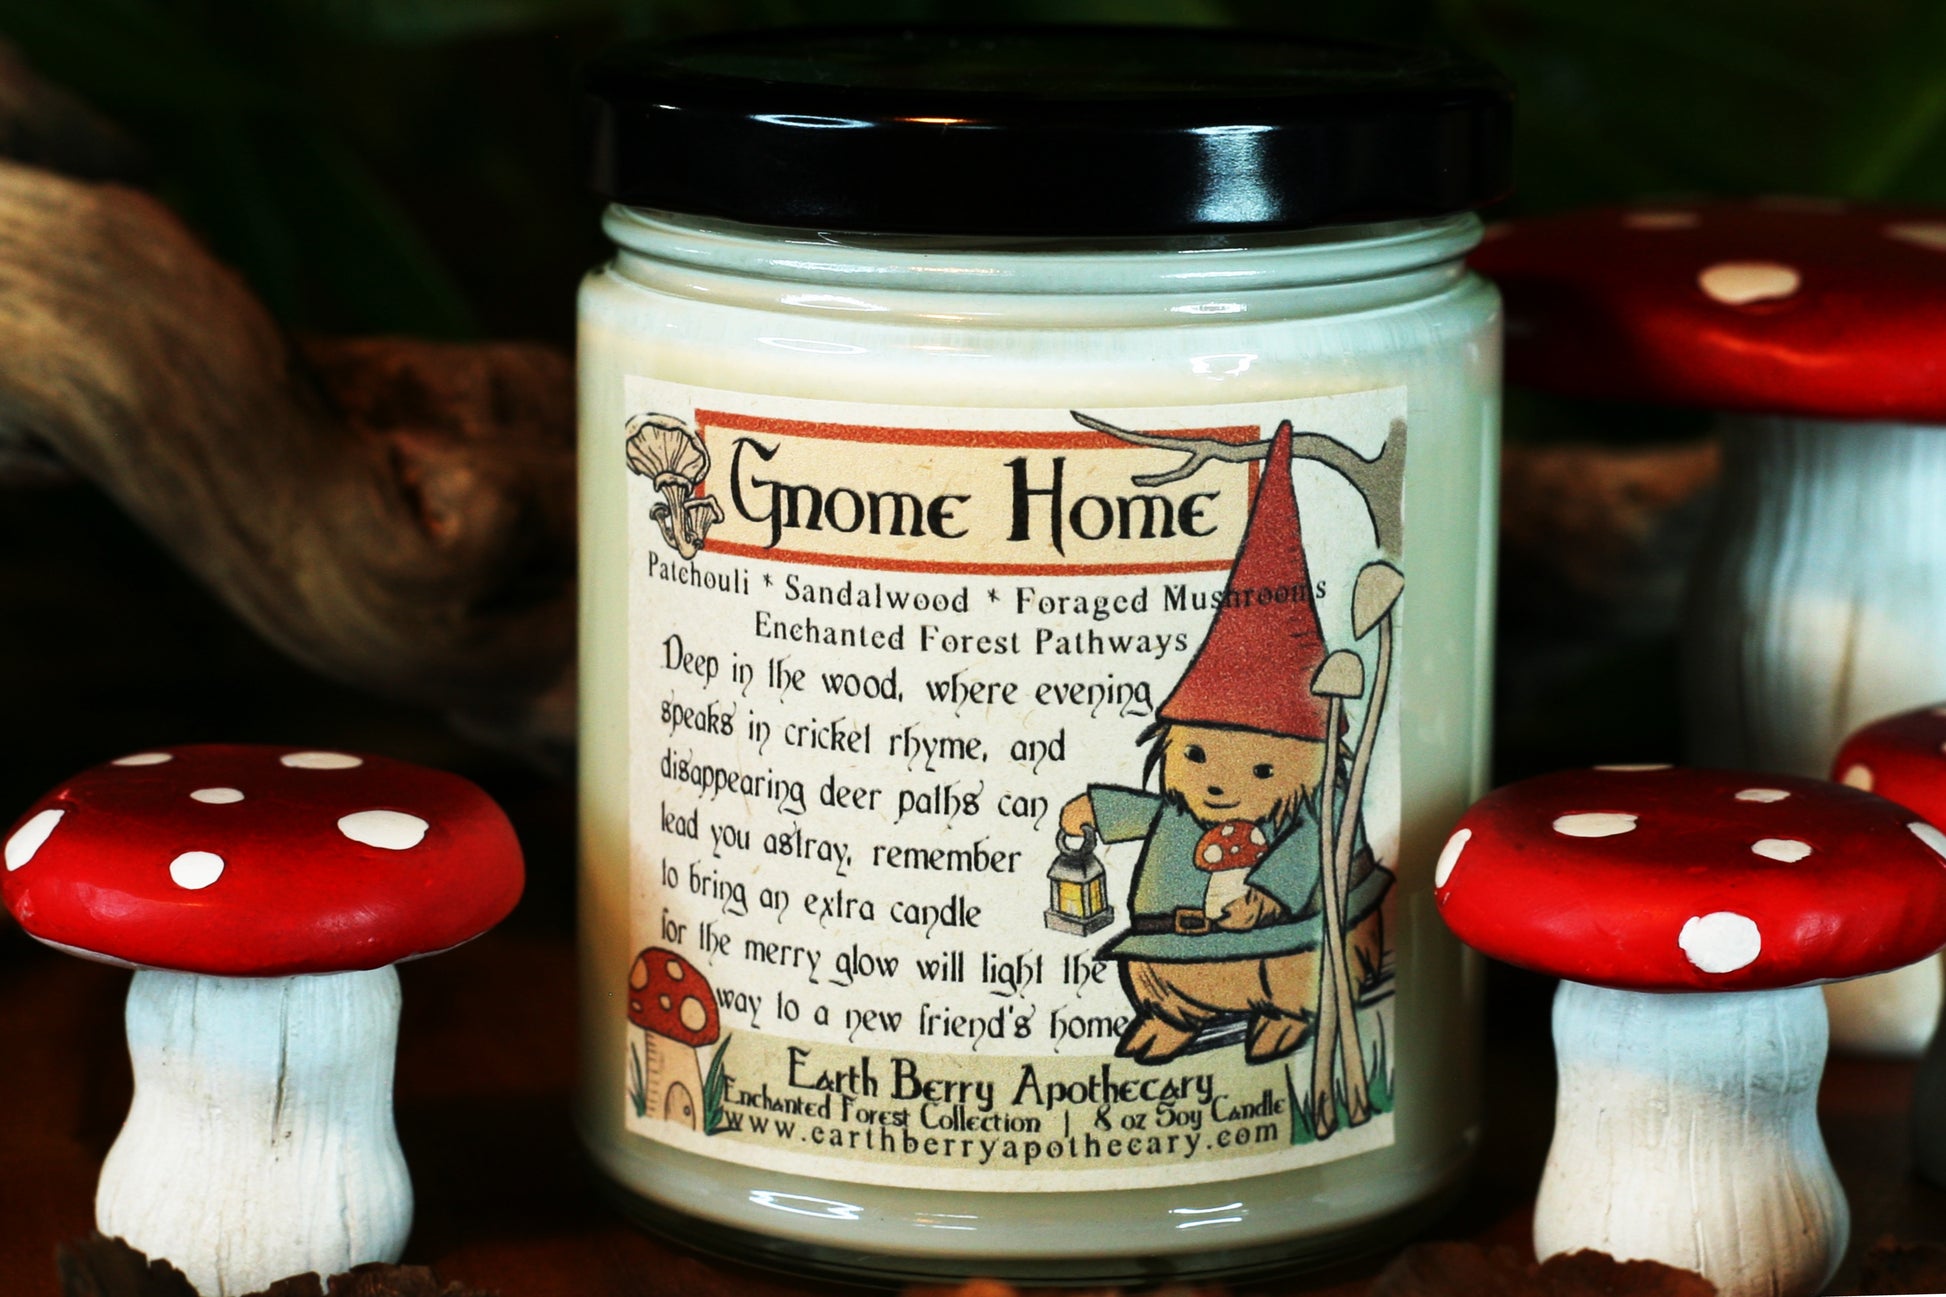 Gnome home patchouli sandalwood scented soy candle